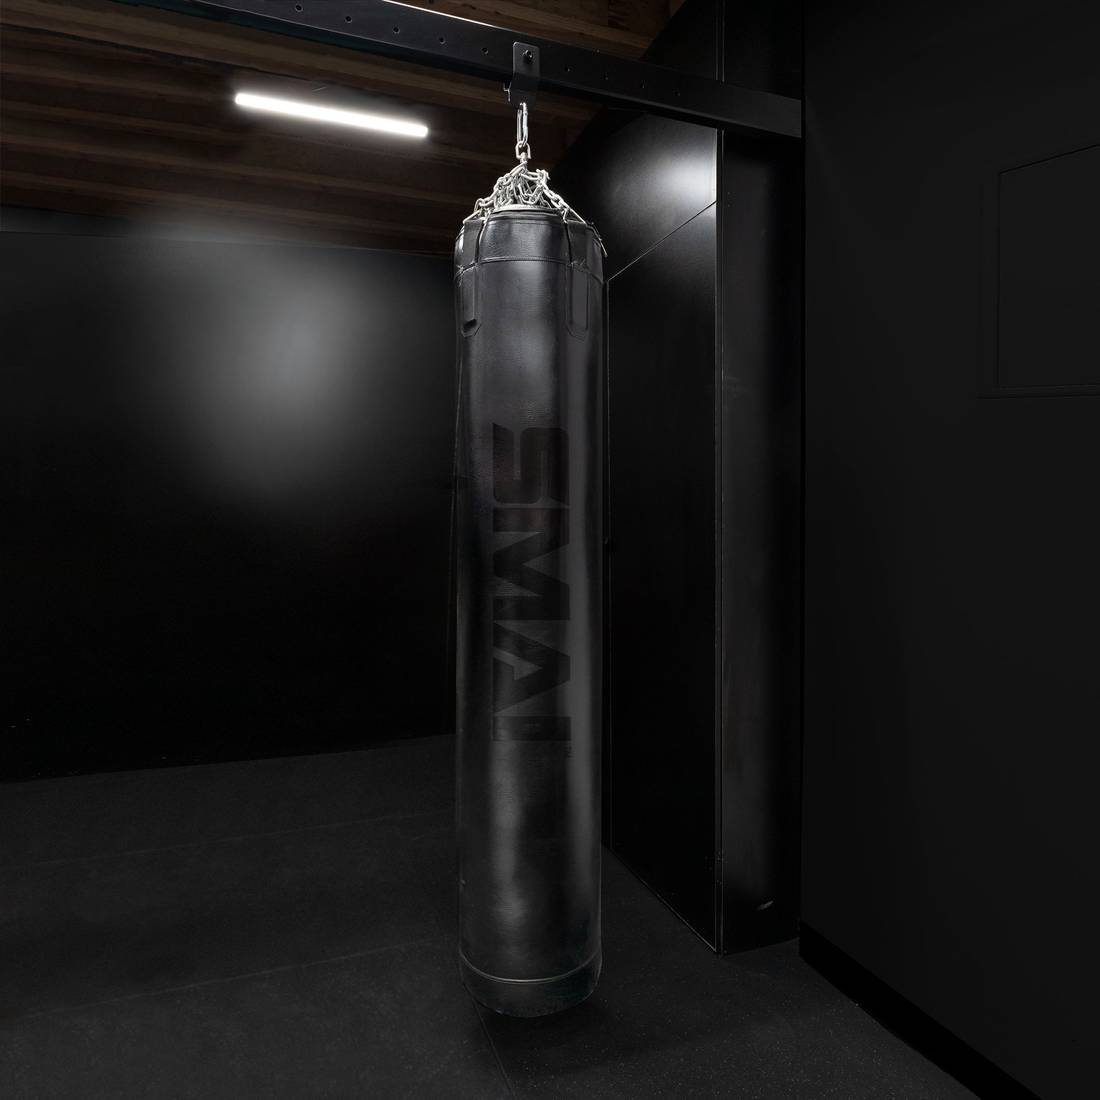 What's inside a Punching Bag? 